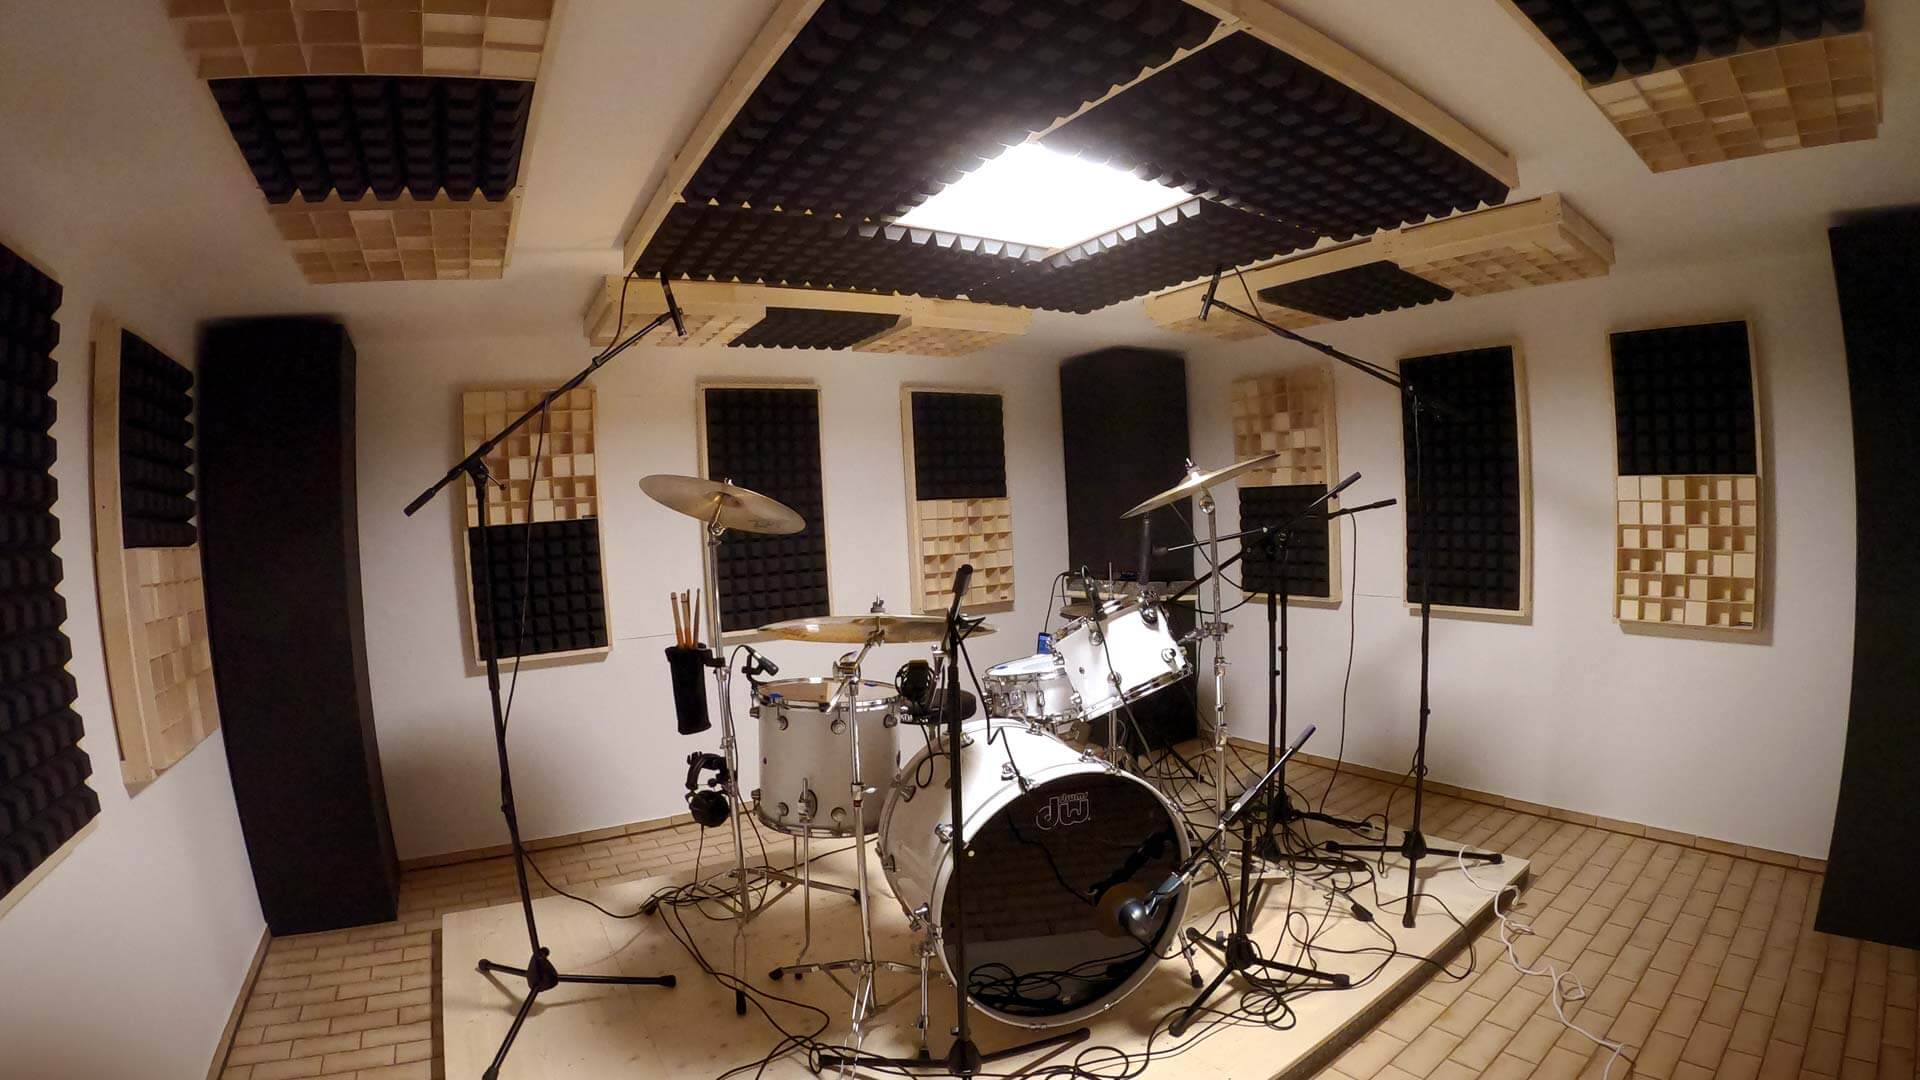 Application pictures of aixFOAM sound absorbers in rehearsal room & recording studio